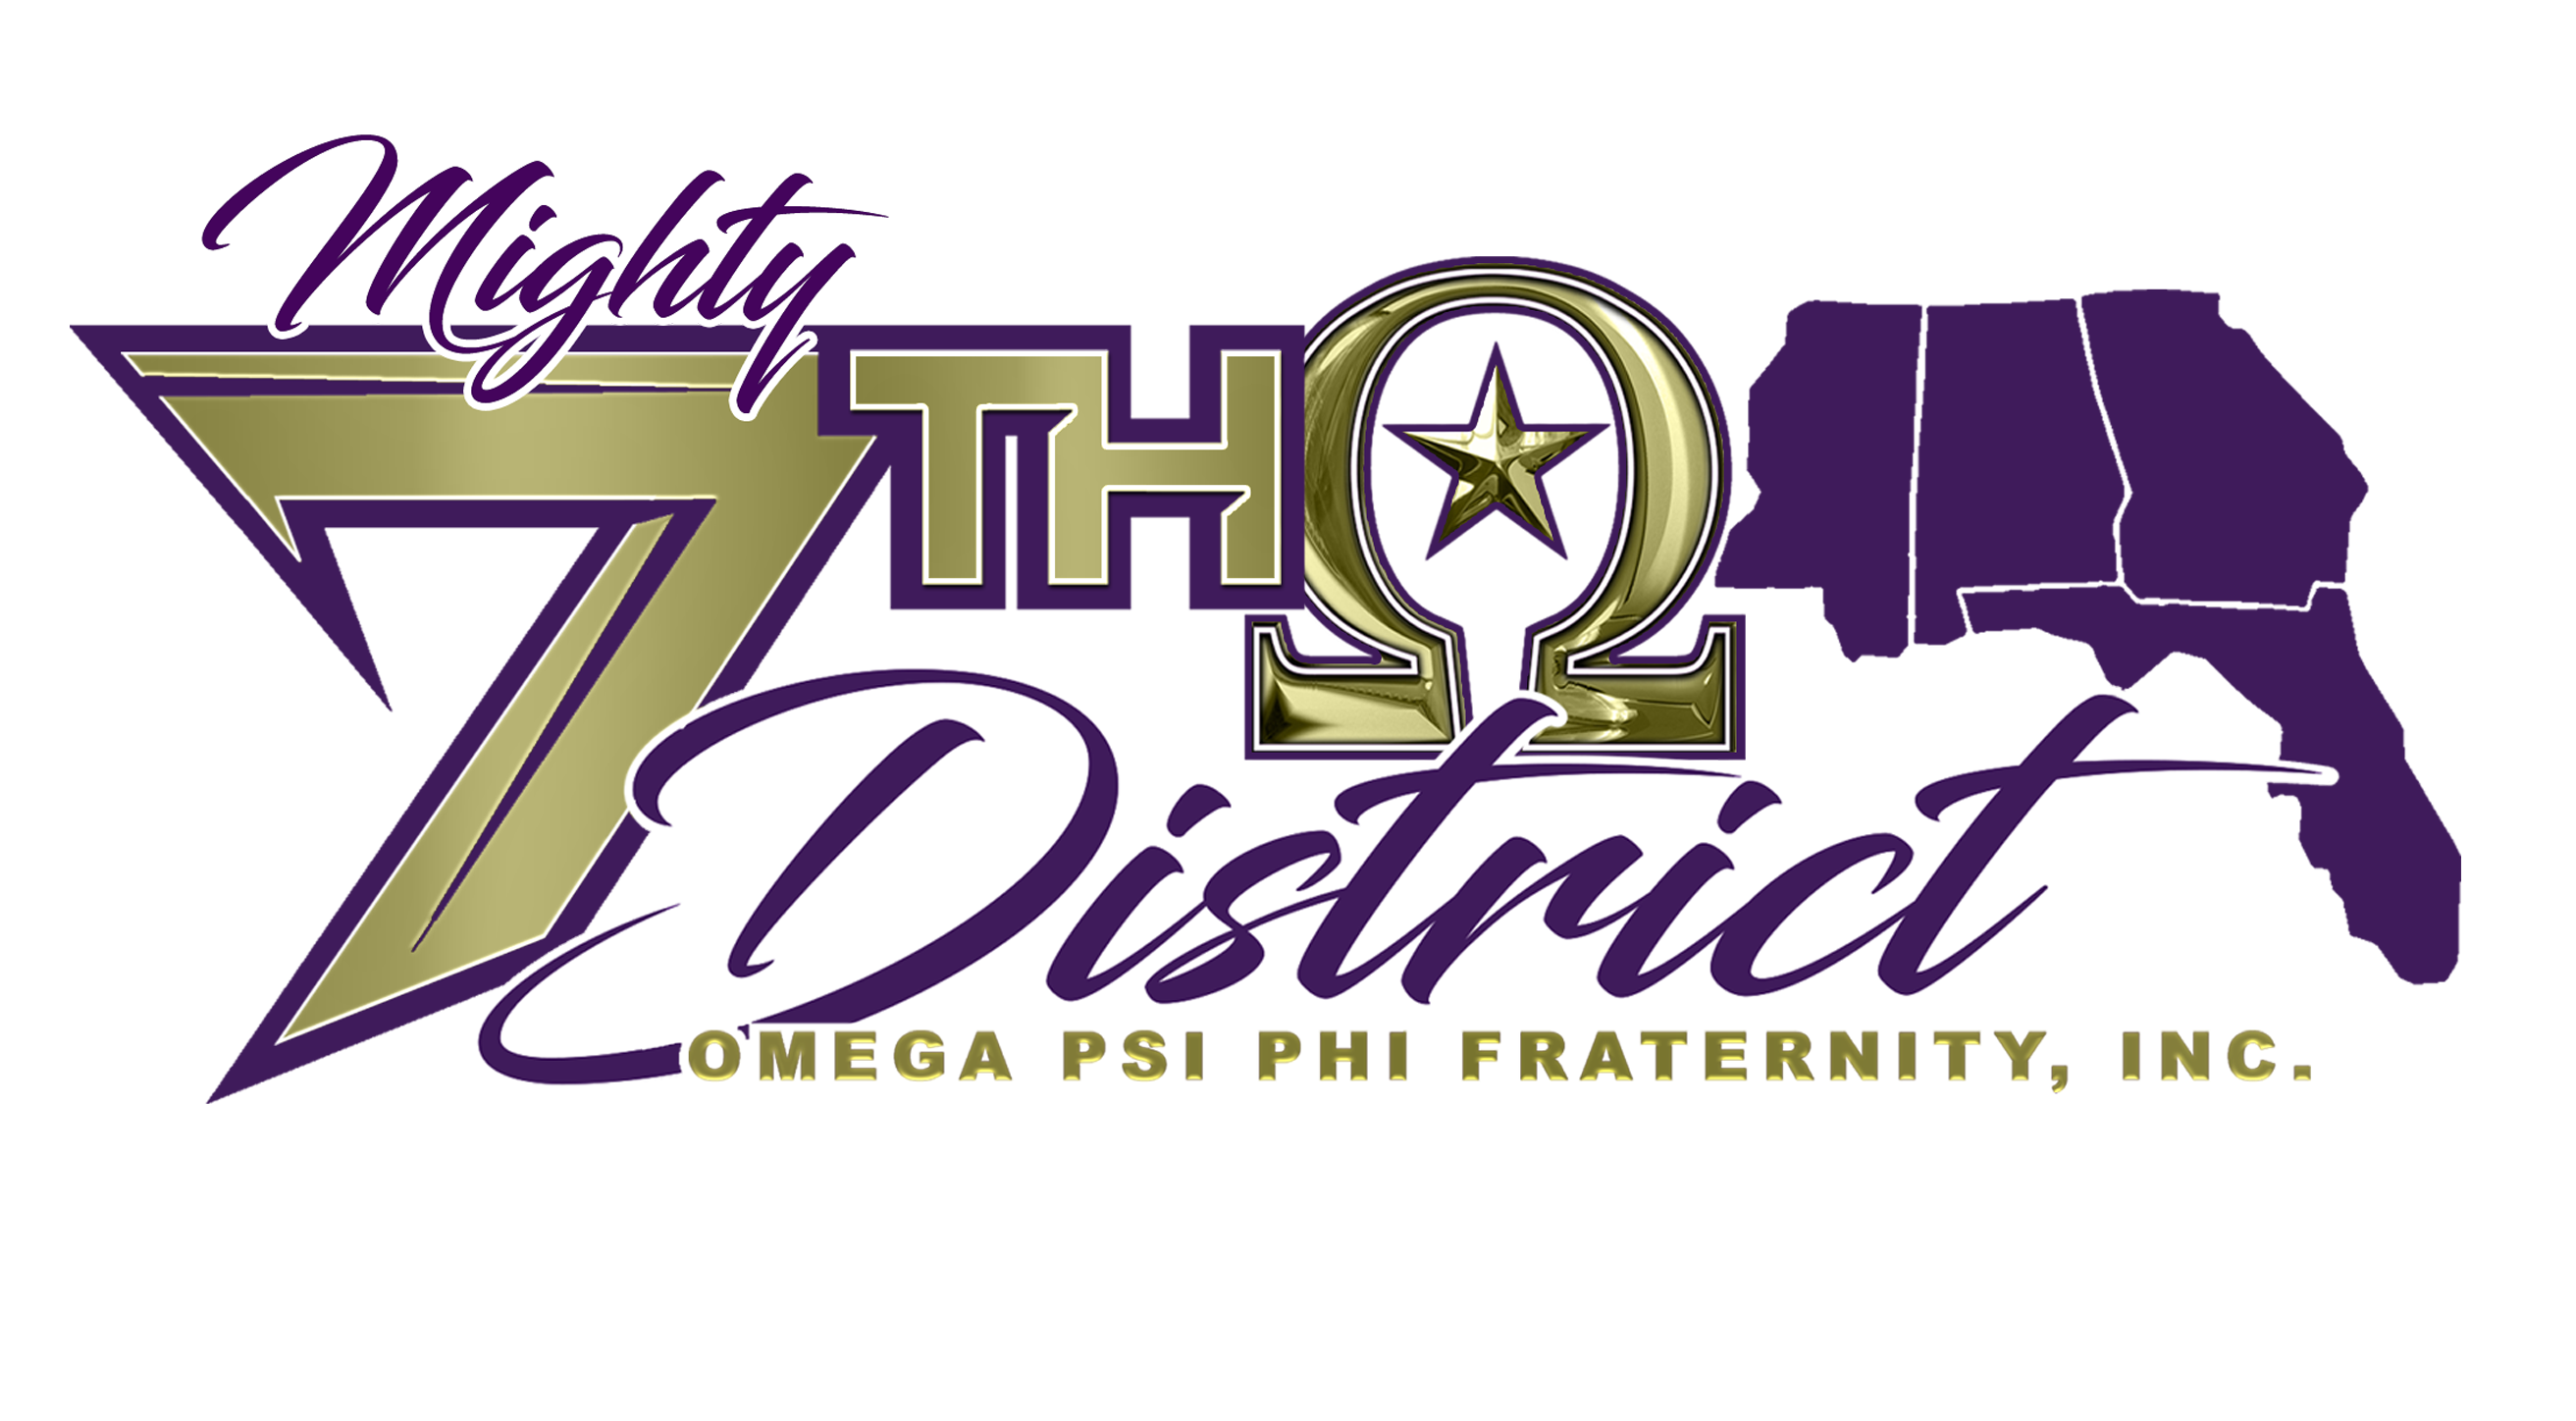 Omega Psi Phi Fraternity, Inc, - 7th District